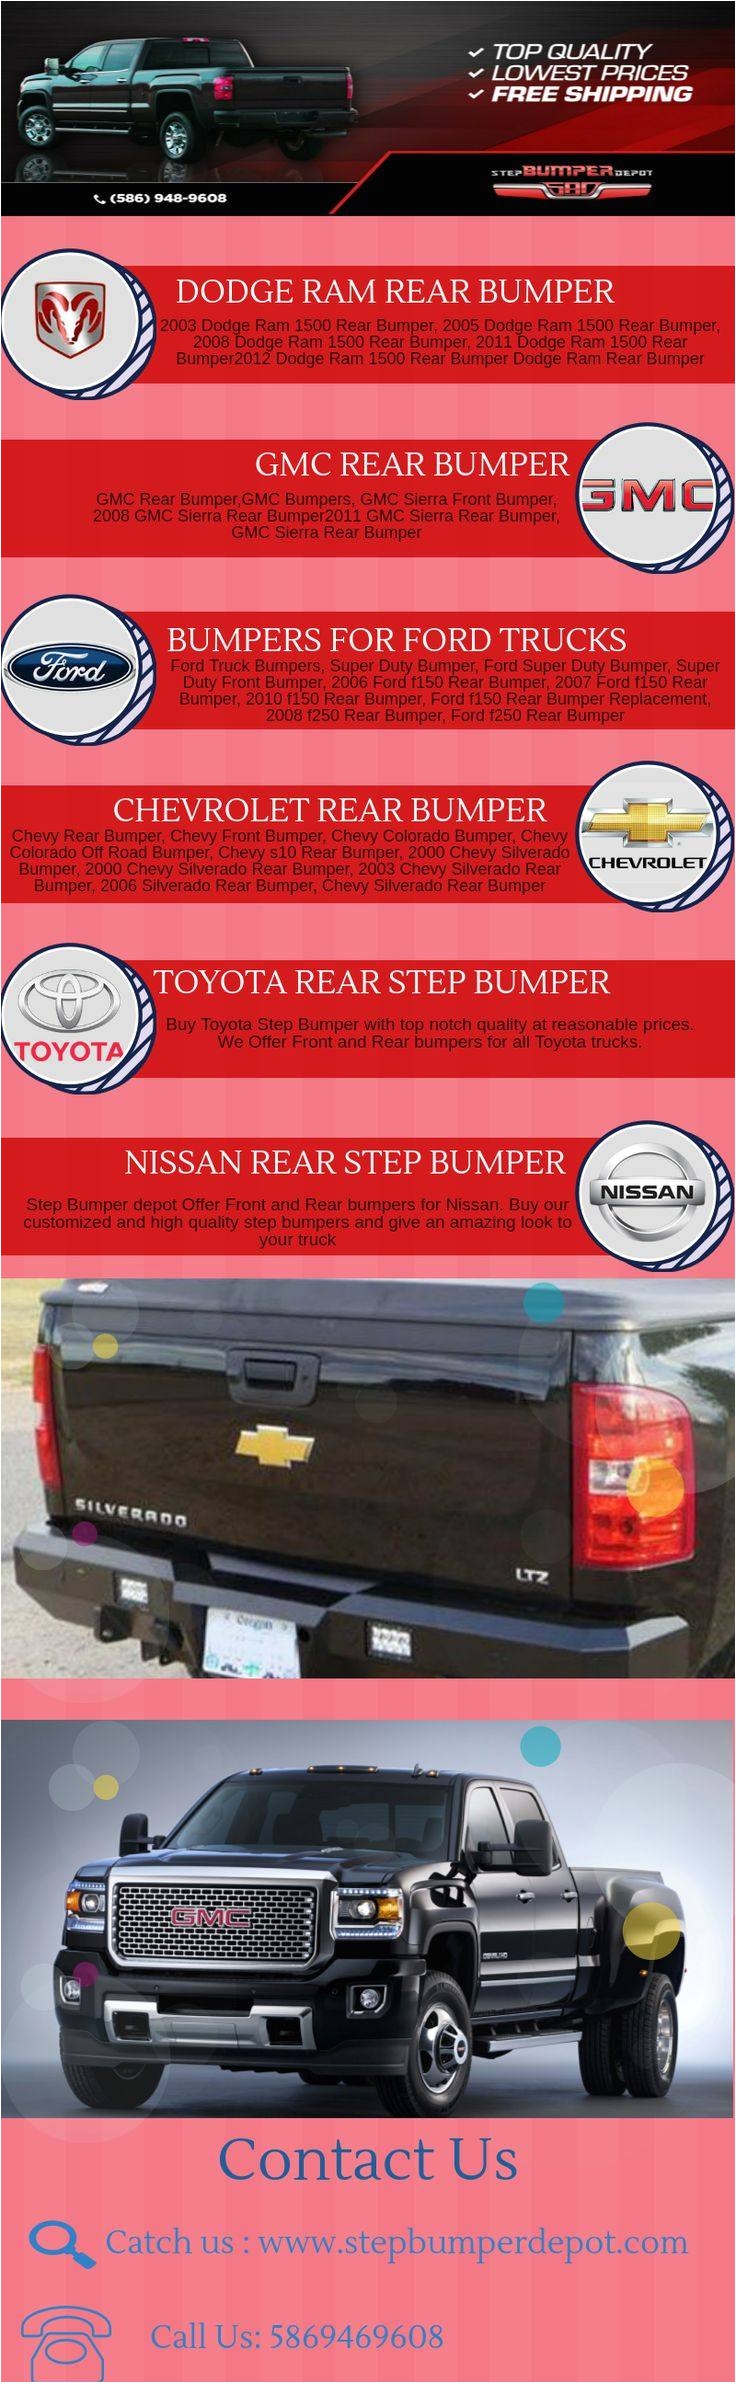 the 24 best gmc sierra bumpers images on pinterest types of chevy silverado tail lights